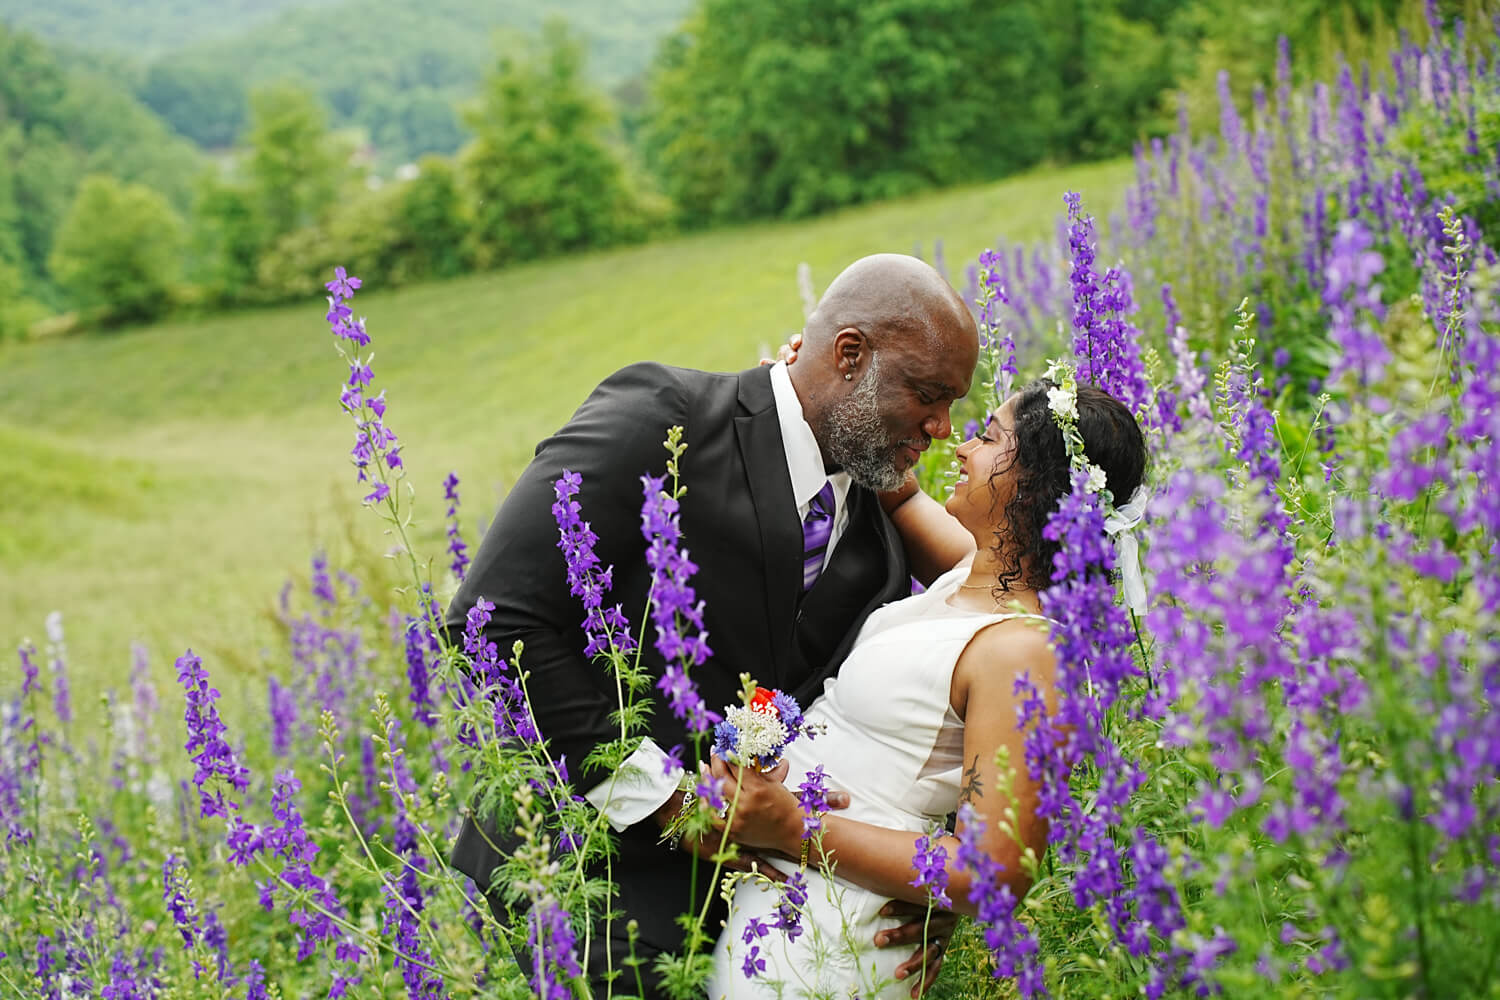 Groom leaning his bride back into a meadow of purple larkspur wildflowers in the Smoky Mountains